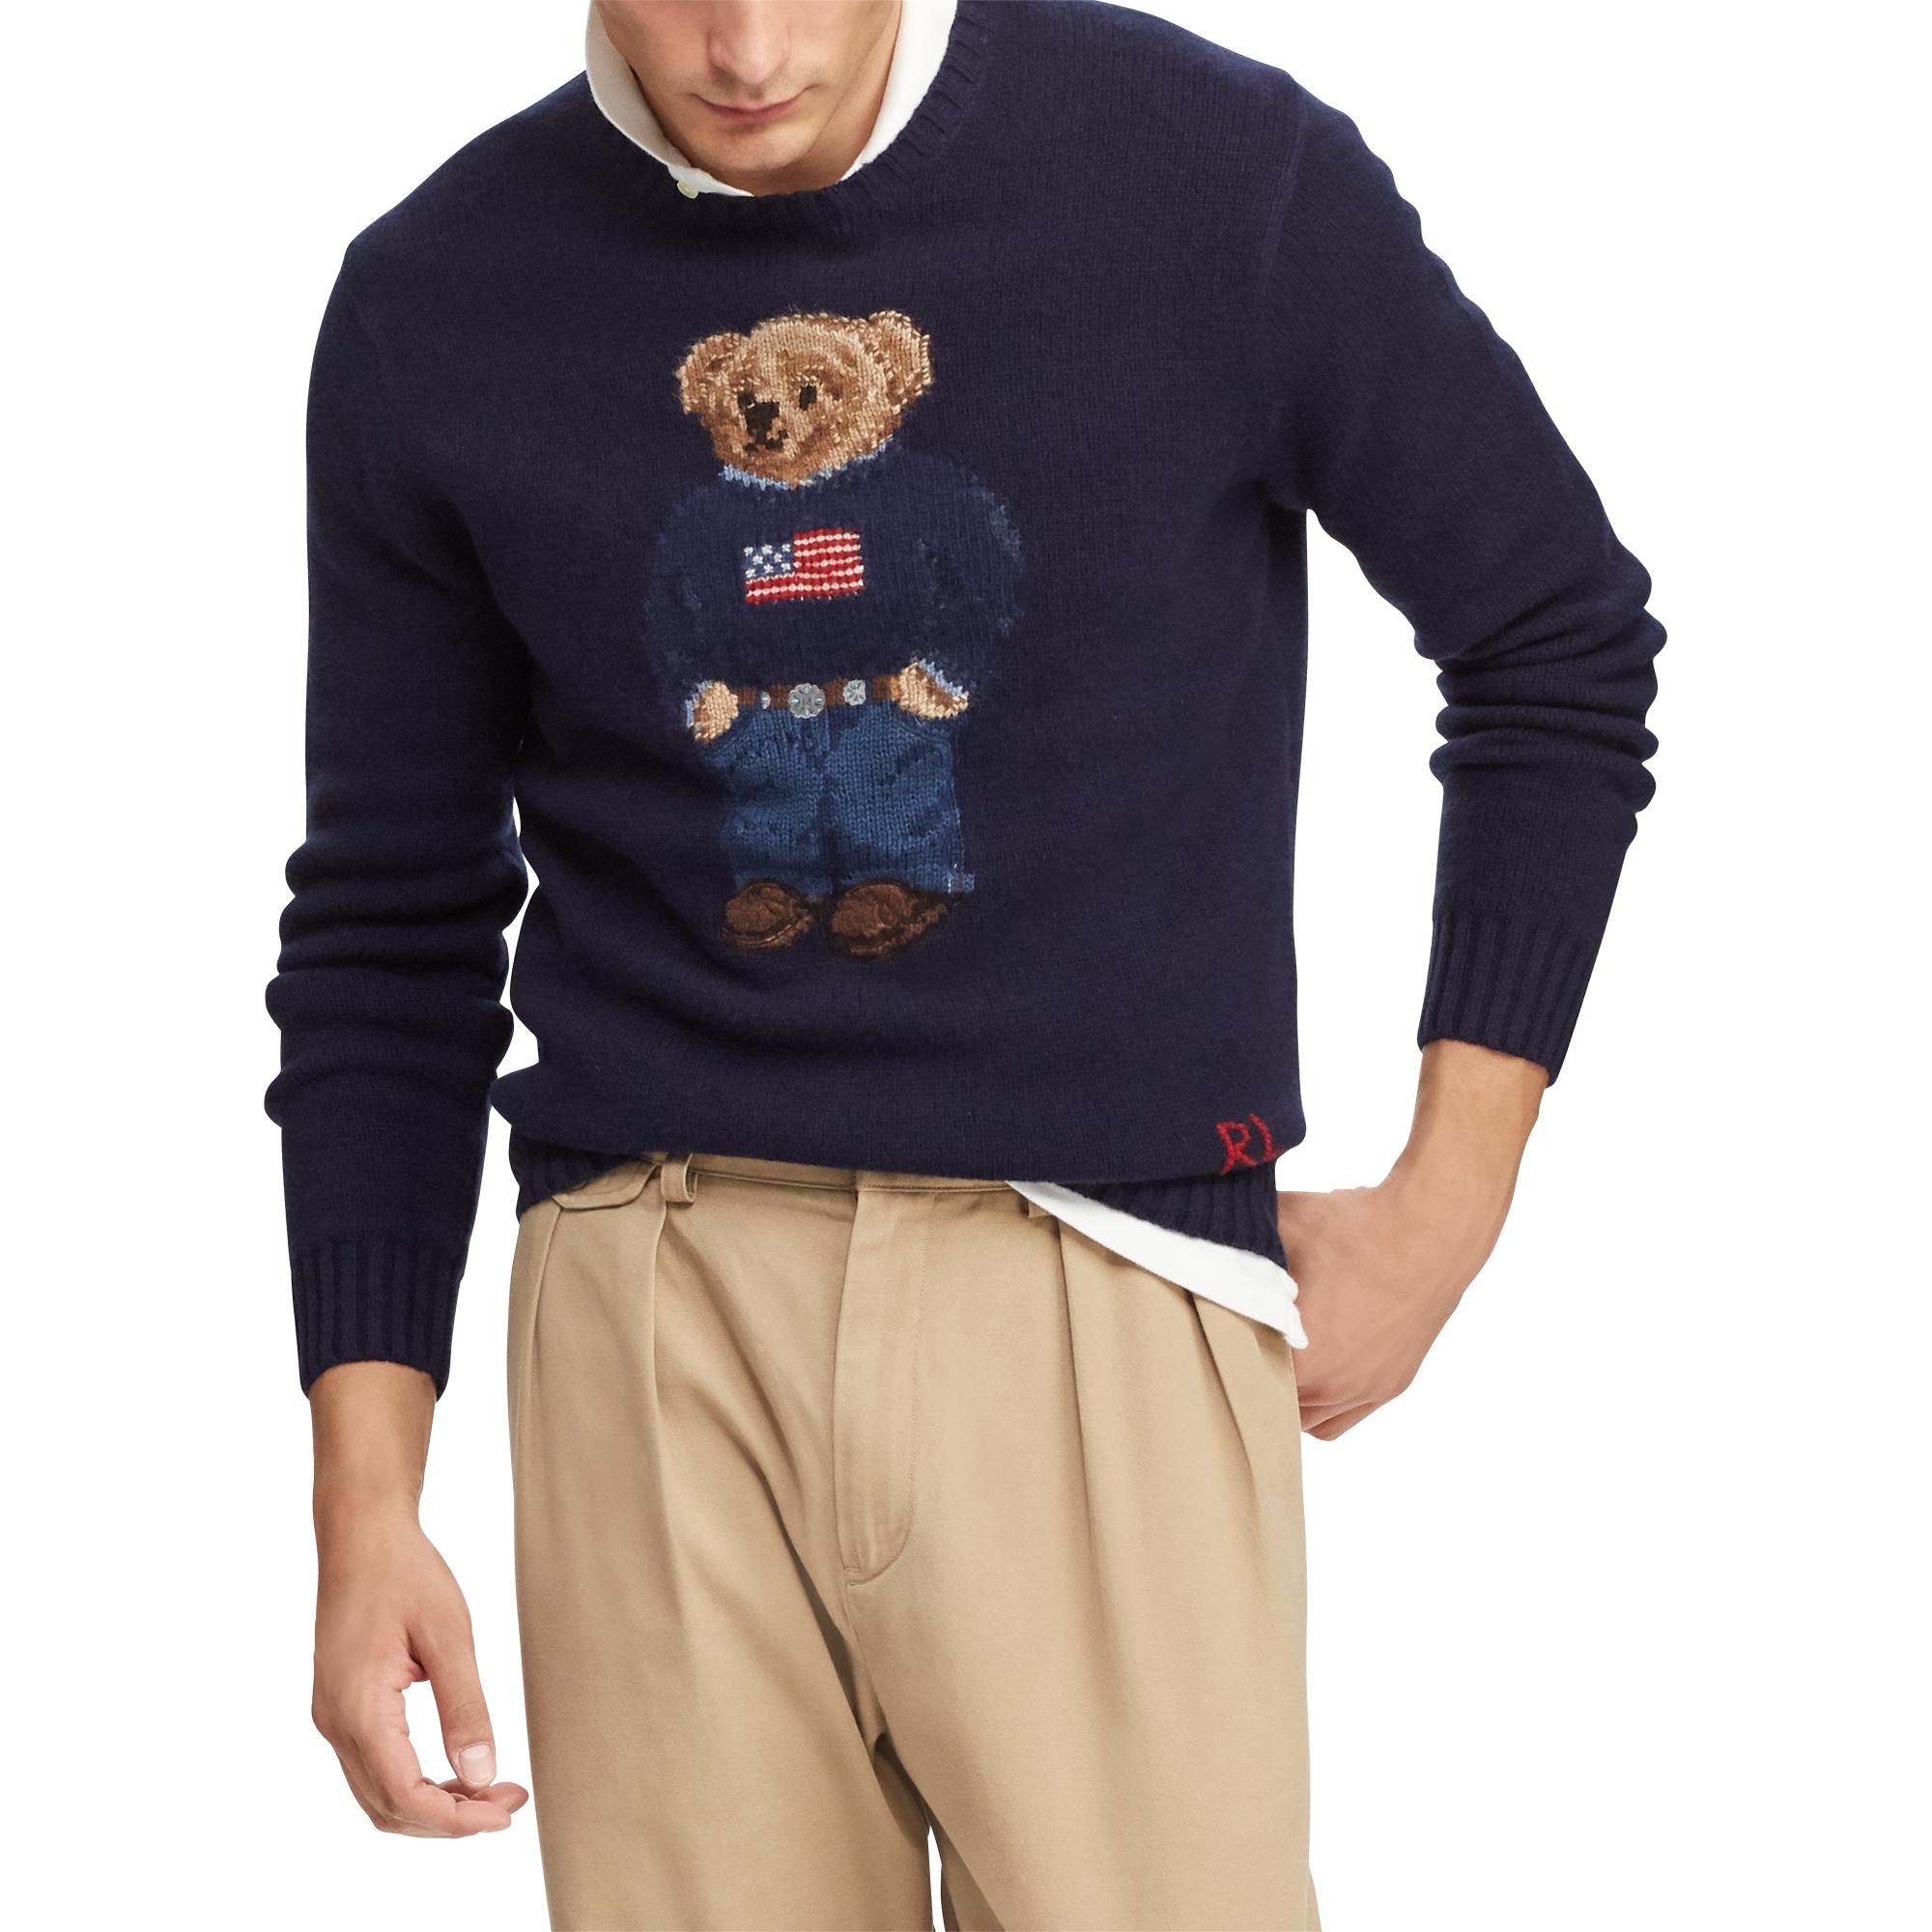 Ralph Lauren Wool The Iconic Polo Bear Jumper in Navy (Blue) for Men - Lyst